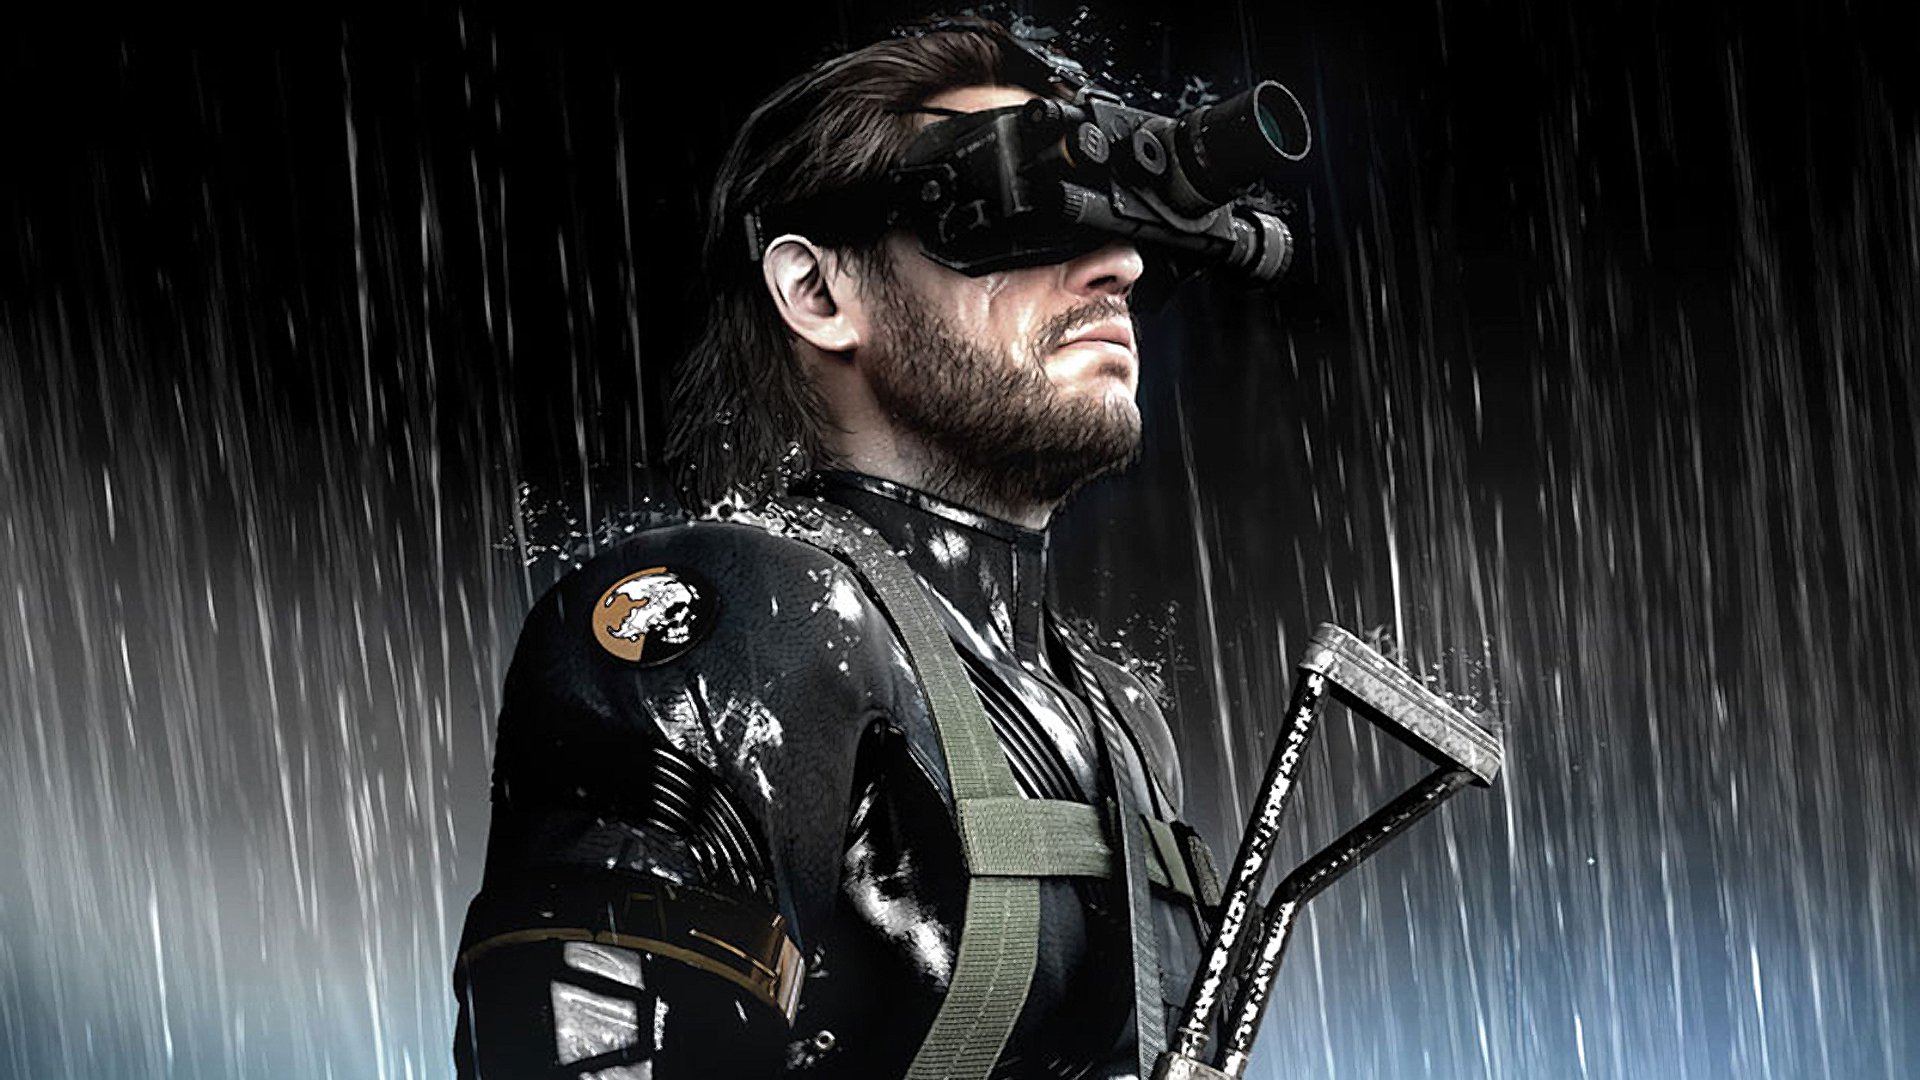 8 metal gear solid v ground zeroes hd wallpapers background images wallpaper abyss 8 metal gear solid v ground zeroes hd